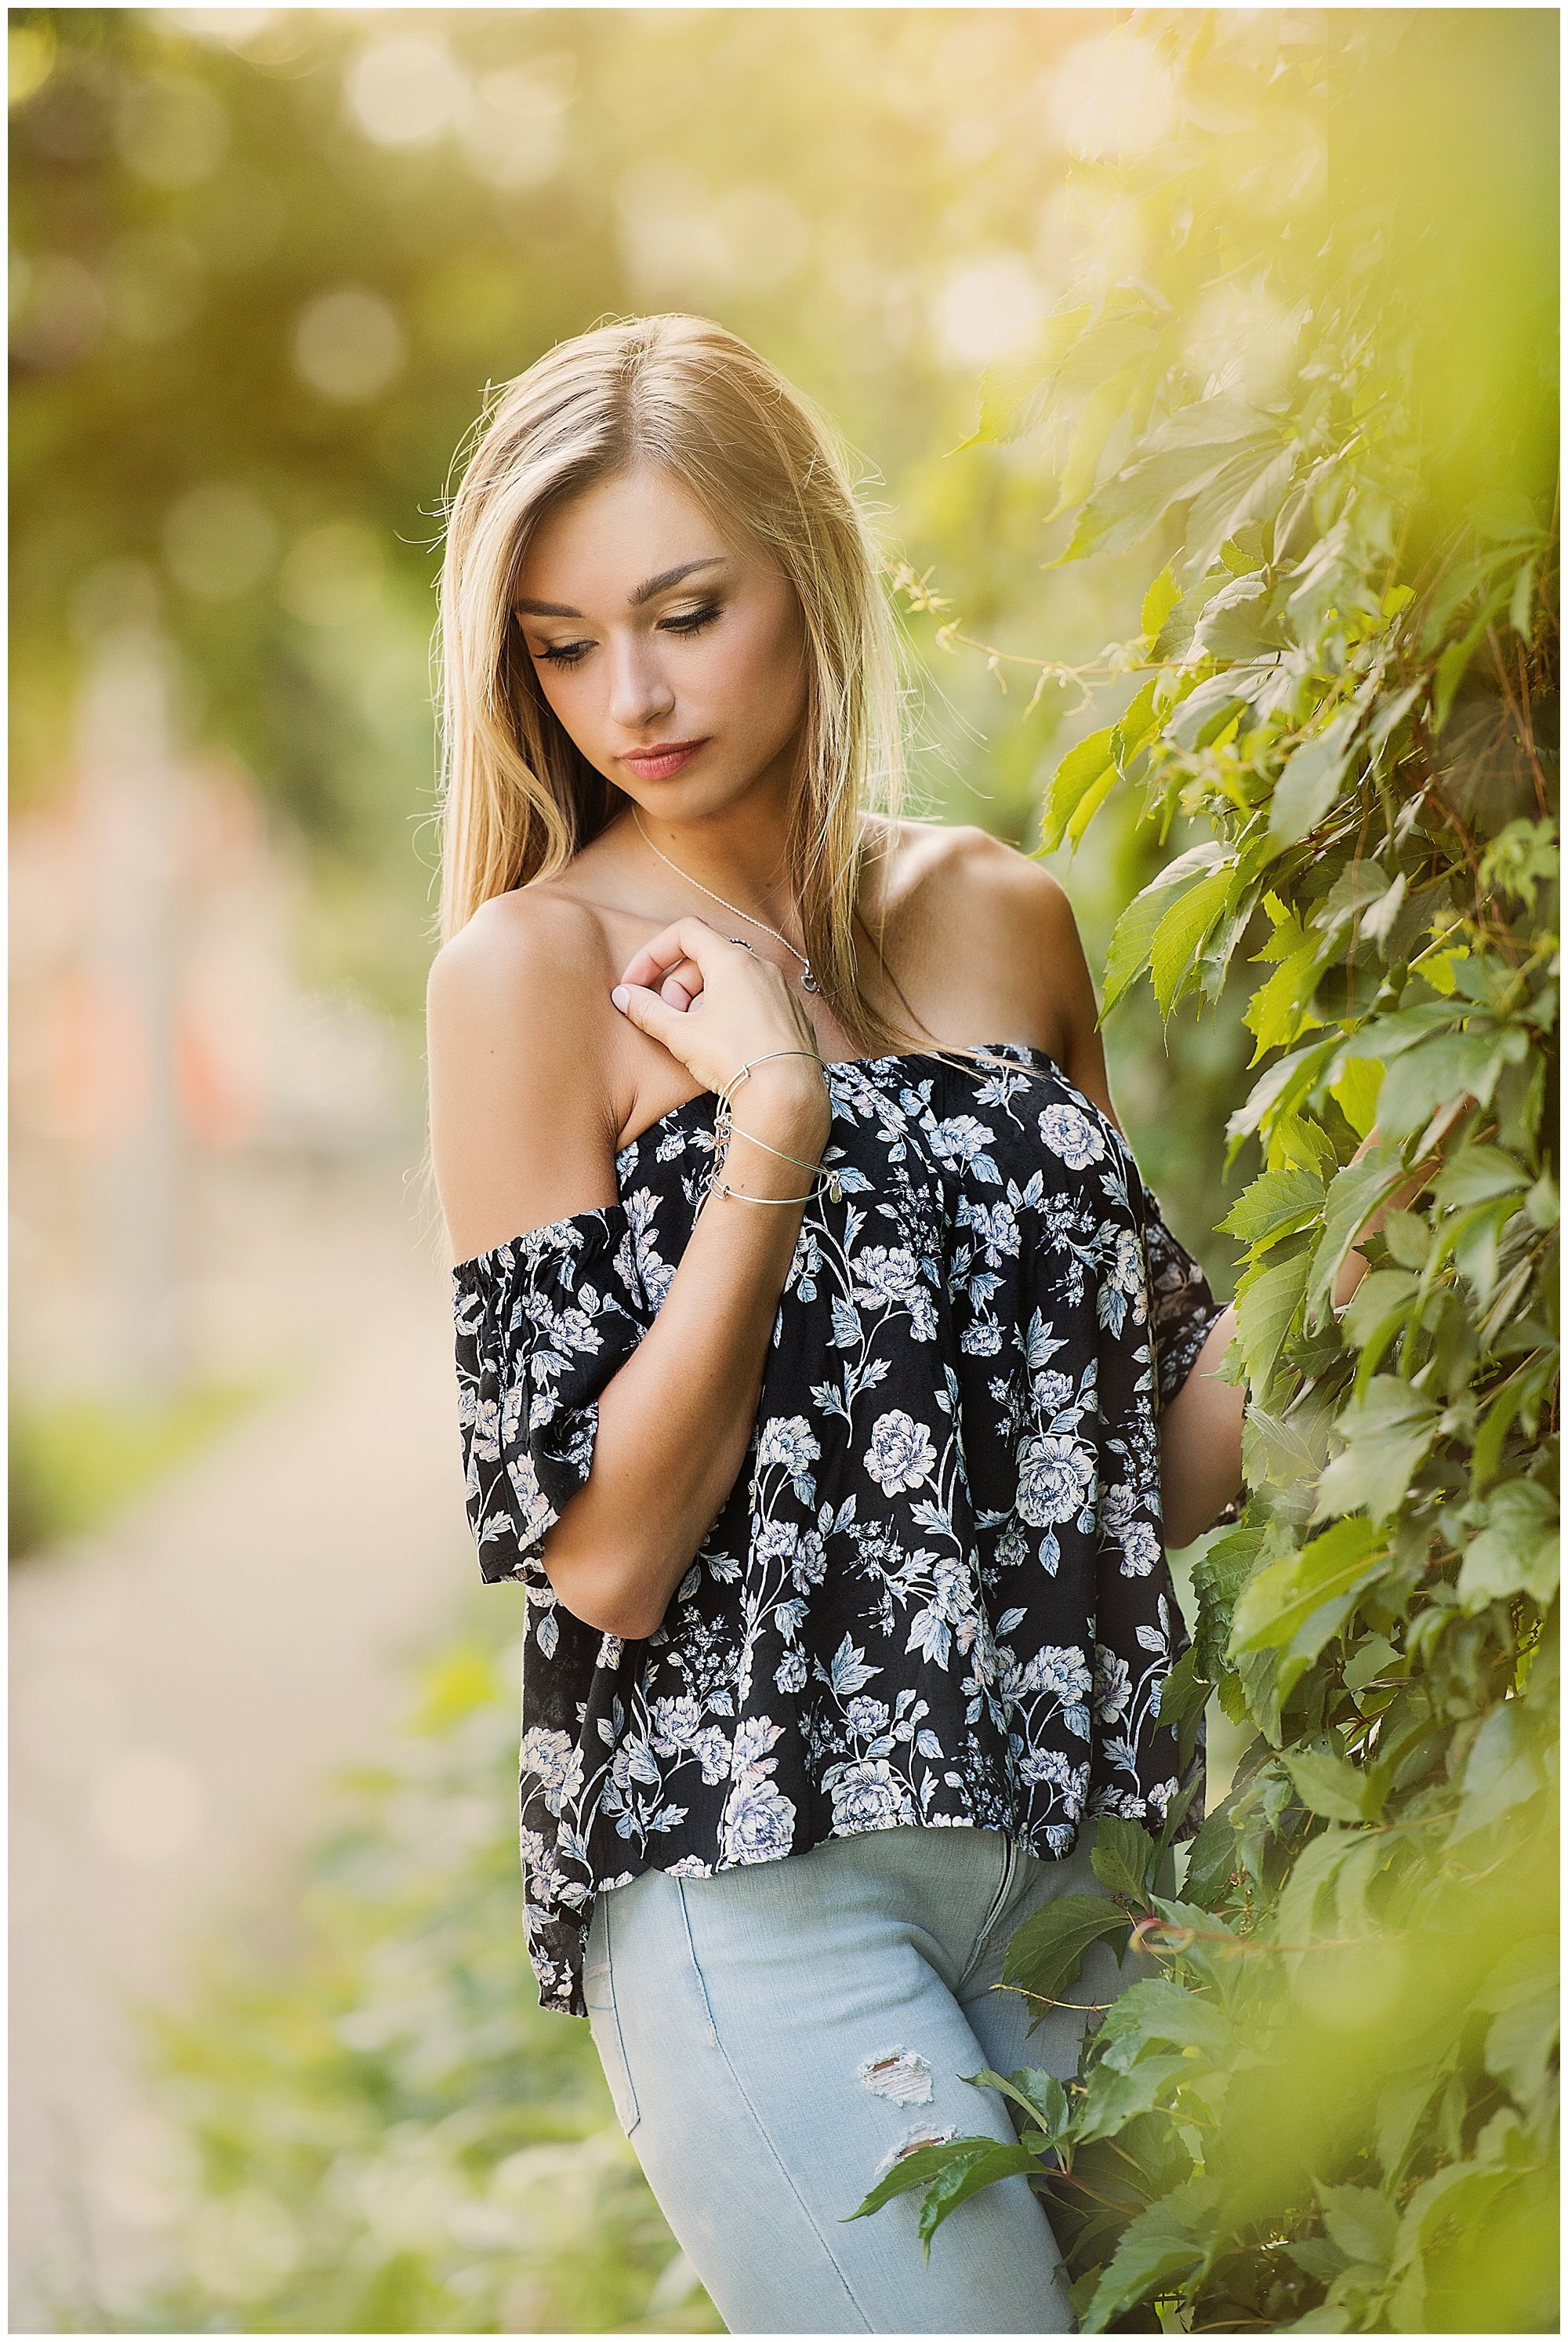 high school senior photo of girl with flower shirt and jeans against ivy wall with sun flare